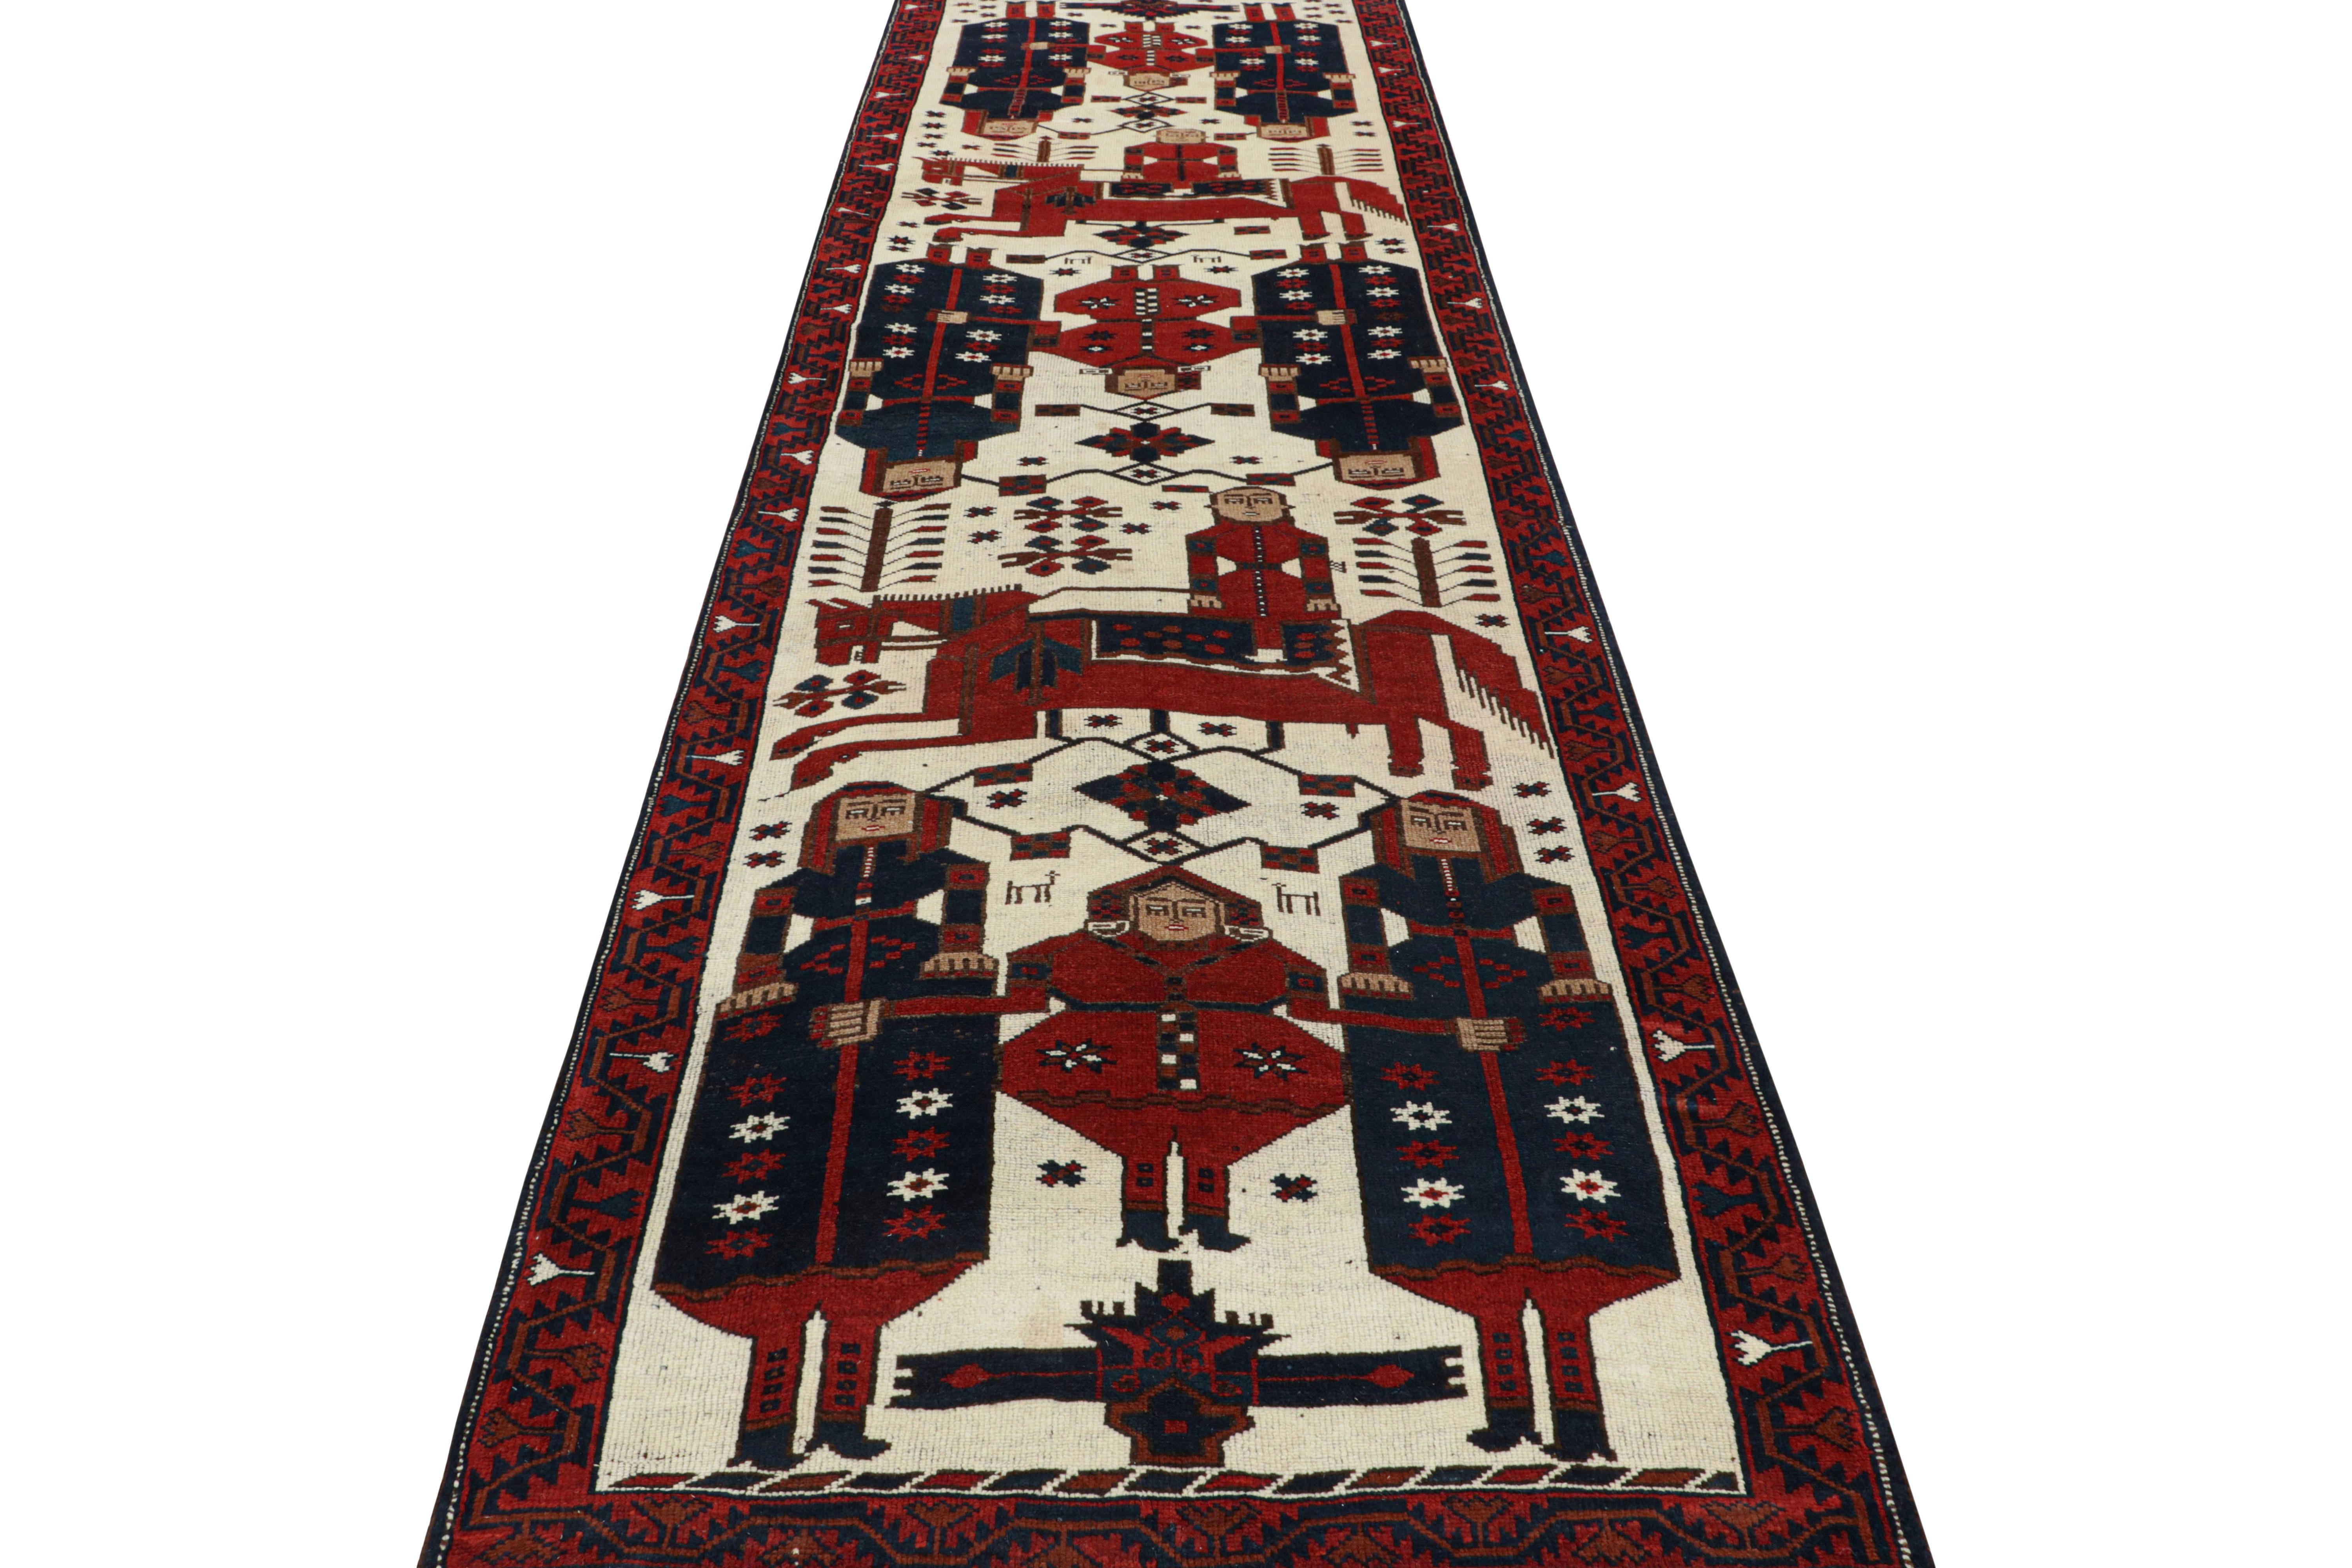 1950s Vintage Tribal Rug in Red, Blue & Beige Pictorial Folk Art by Rug & Kilim In Good Condition For Sale In Long Island City, NY